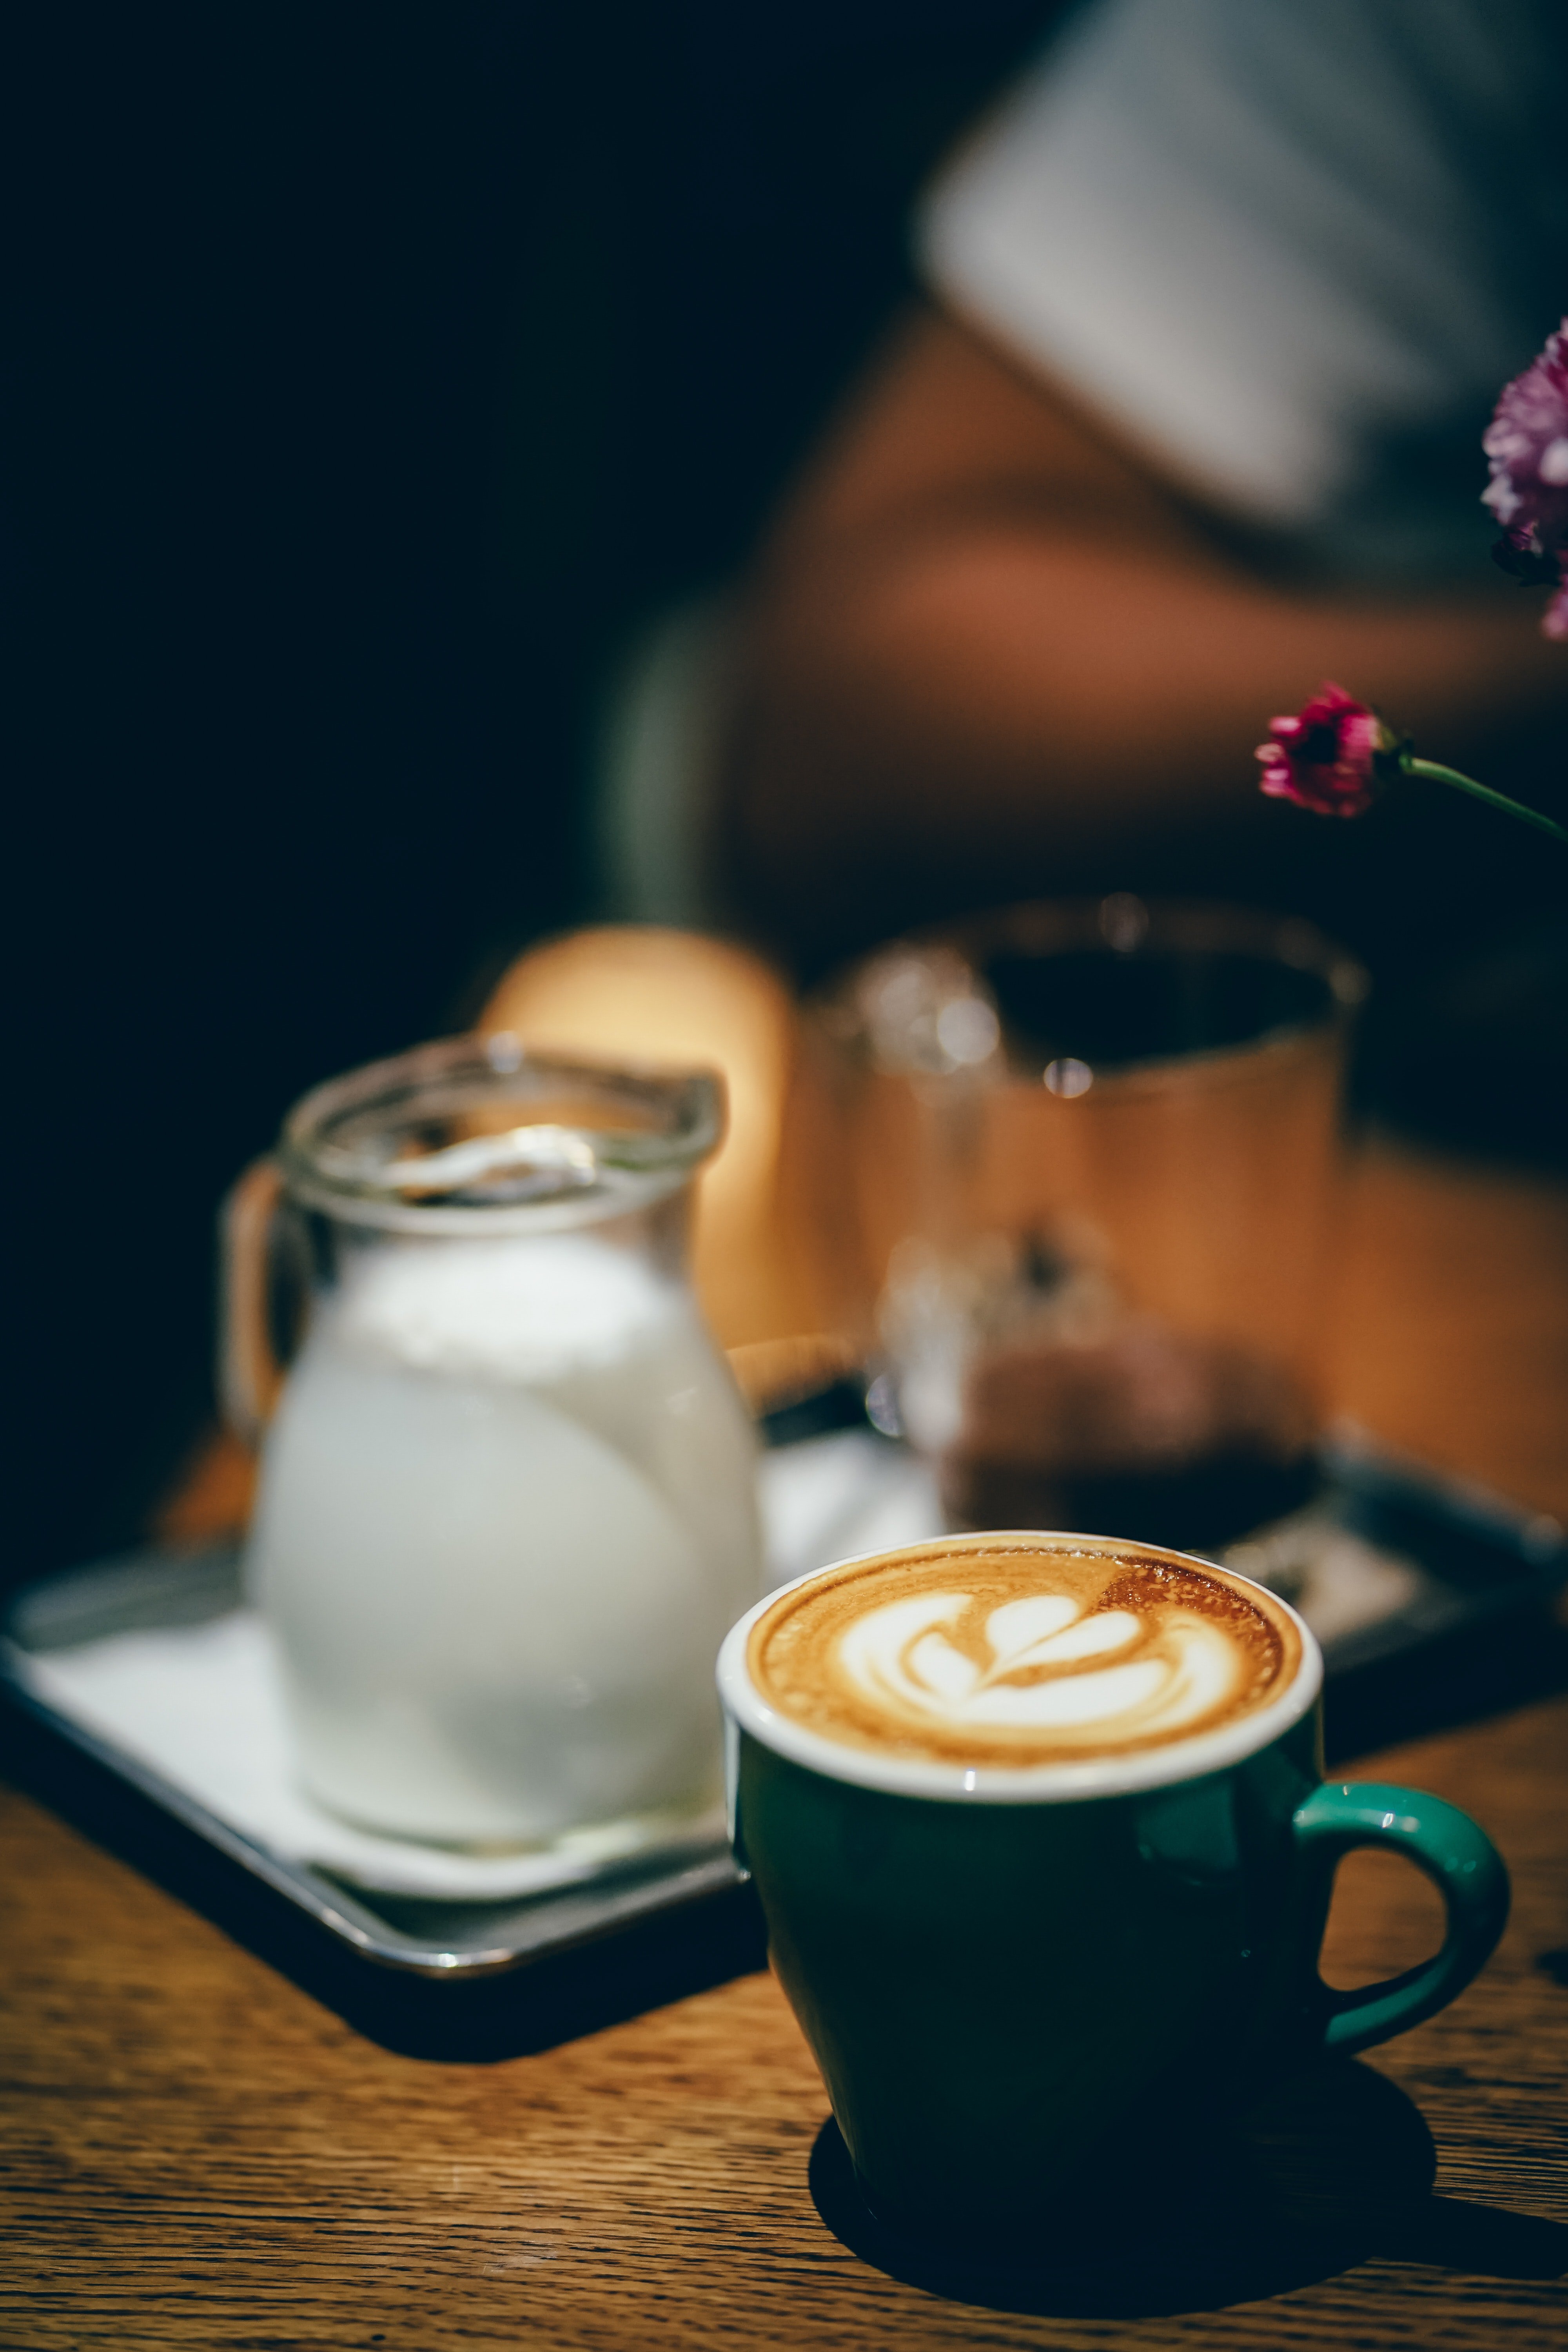 Julia and Catherine decided to grab some coffee. | Source: Pexels